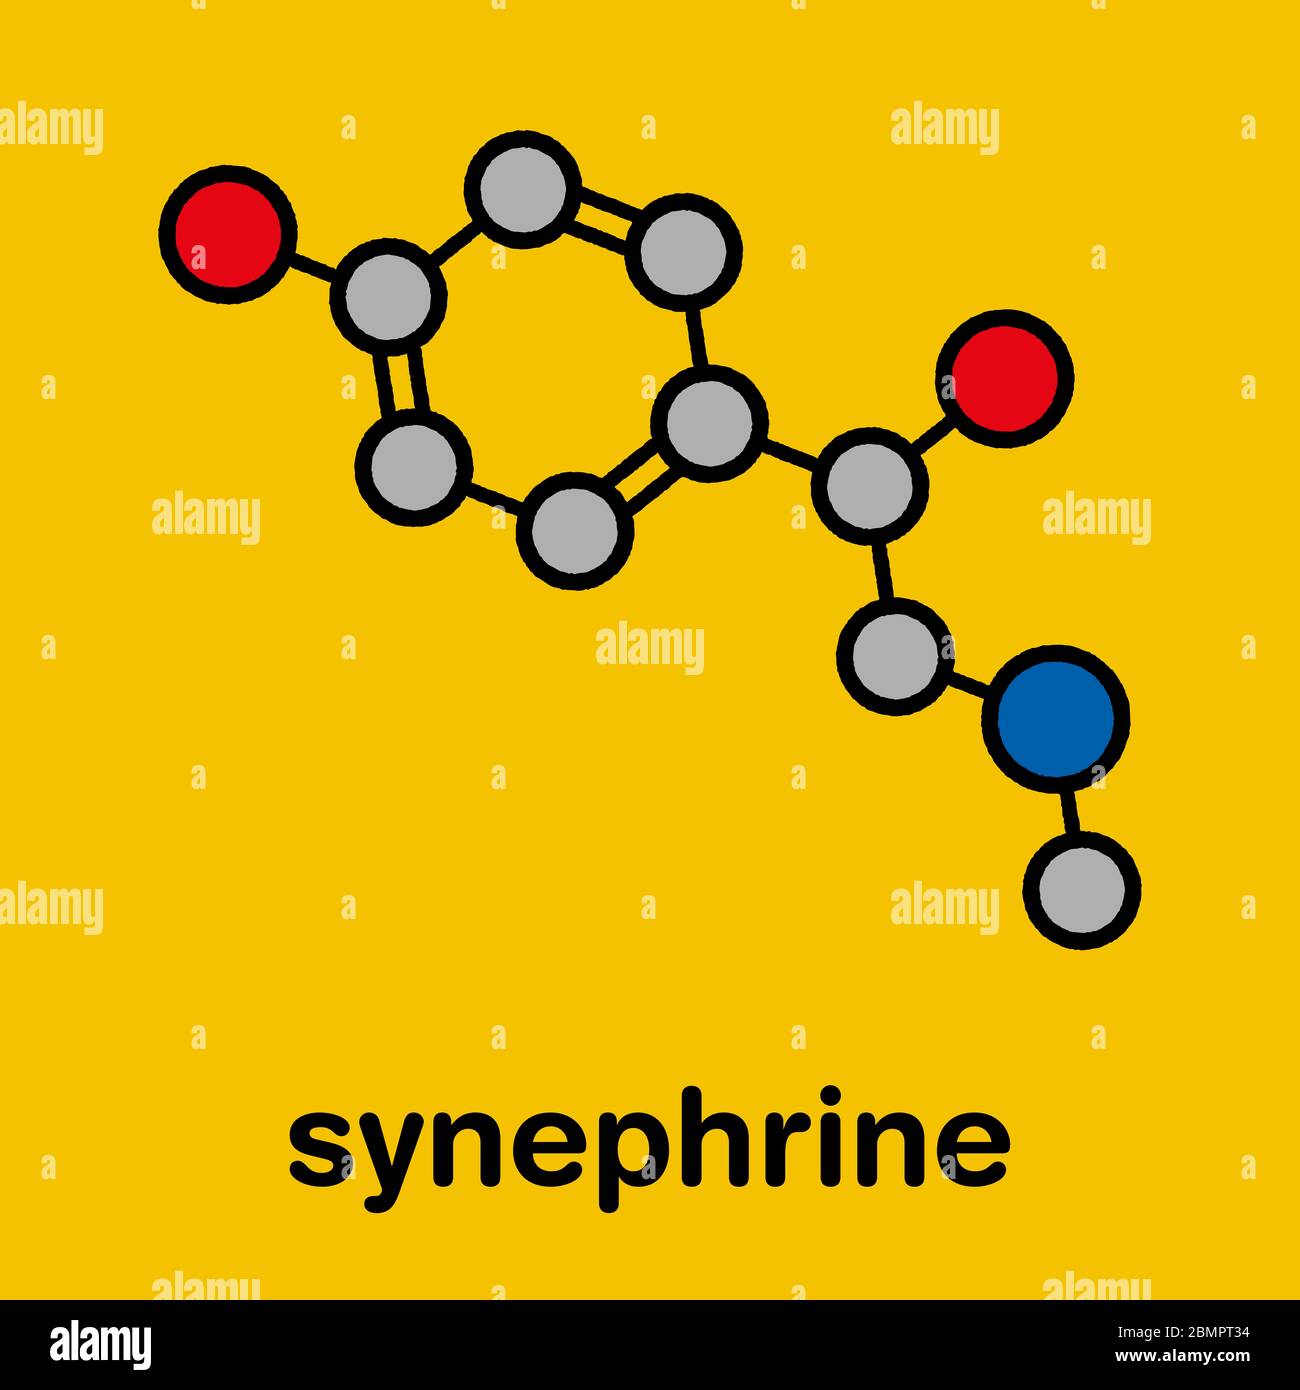 Synephrine herbal stimulant molecule. Present in several Citrus species. Stylized skeletal formula (chemical structure): Atoms are shown as color-coded circles: hydrogen (hidden), carbon (grey), oxygen (red), nitrogen (blue). Stock Photo